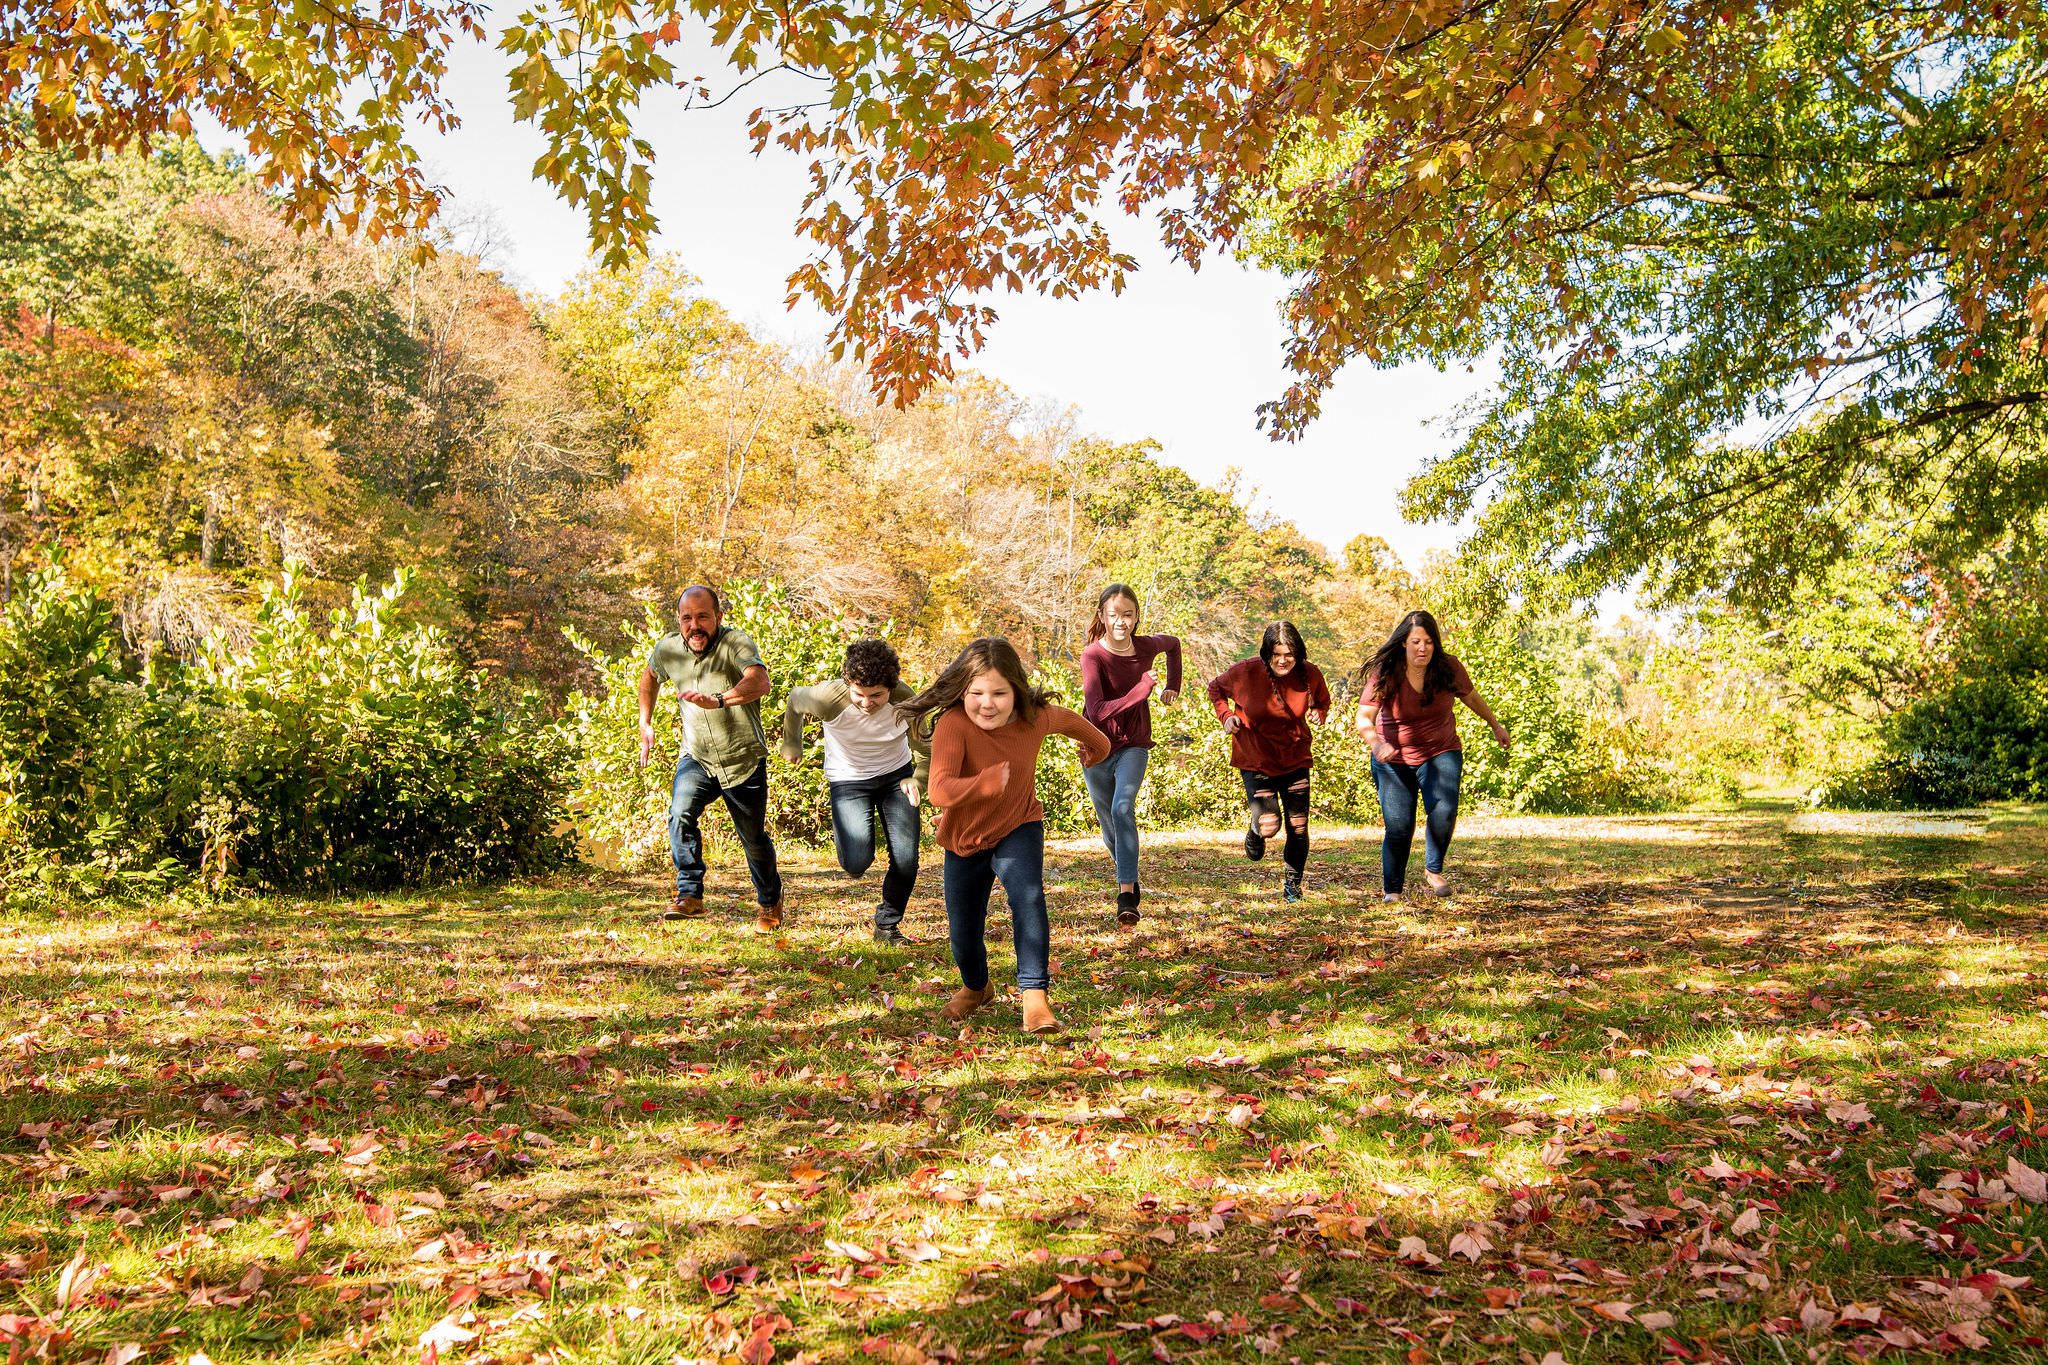 A Outdoor Family Photography Session in the fall weather and trees